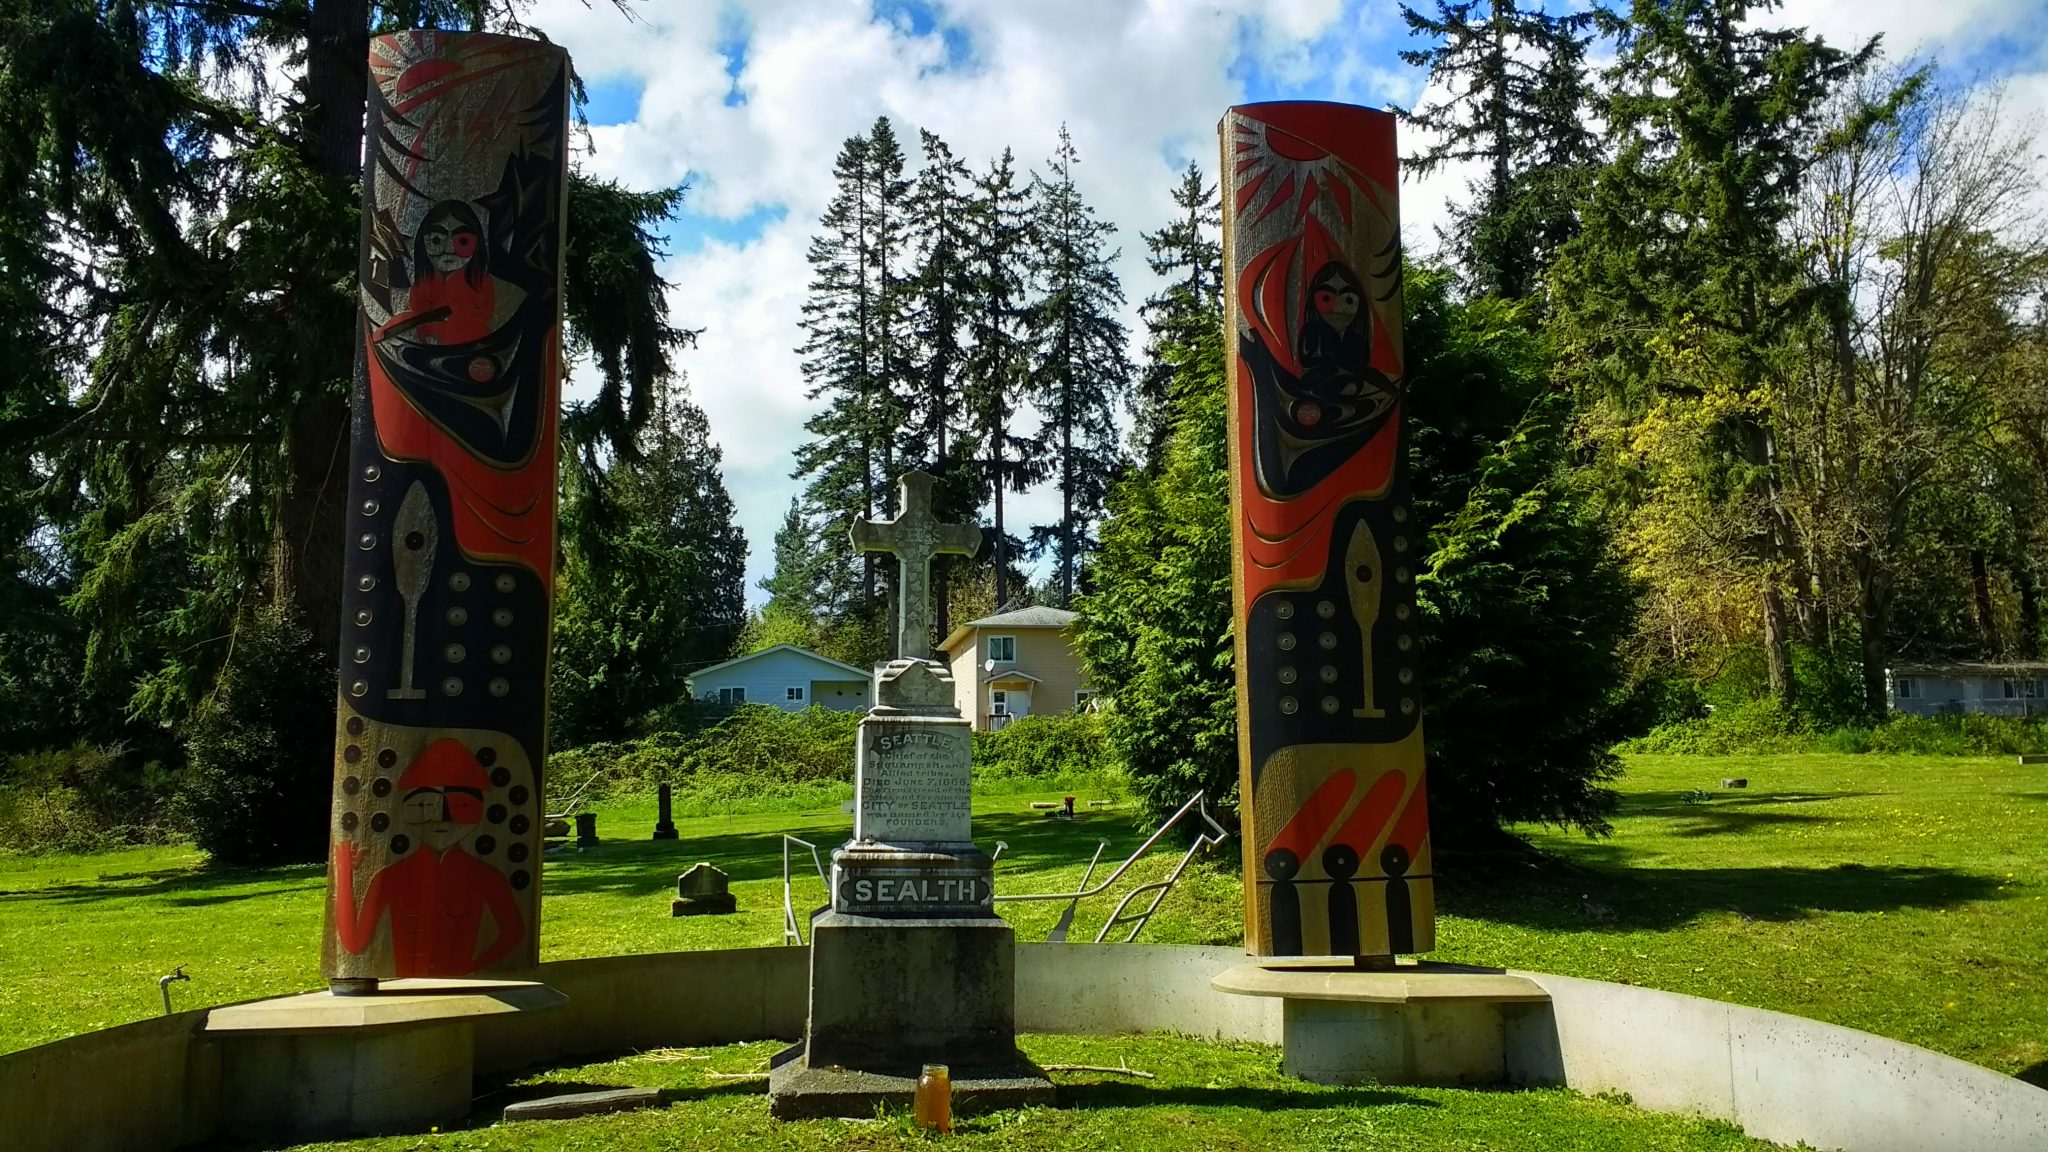 A tall gray gravestone has a red and black painted pole on each side of it in a grassy area. There are evergreen trees and houses in the background